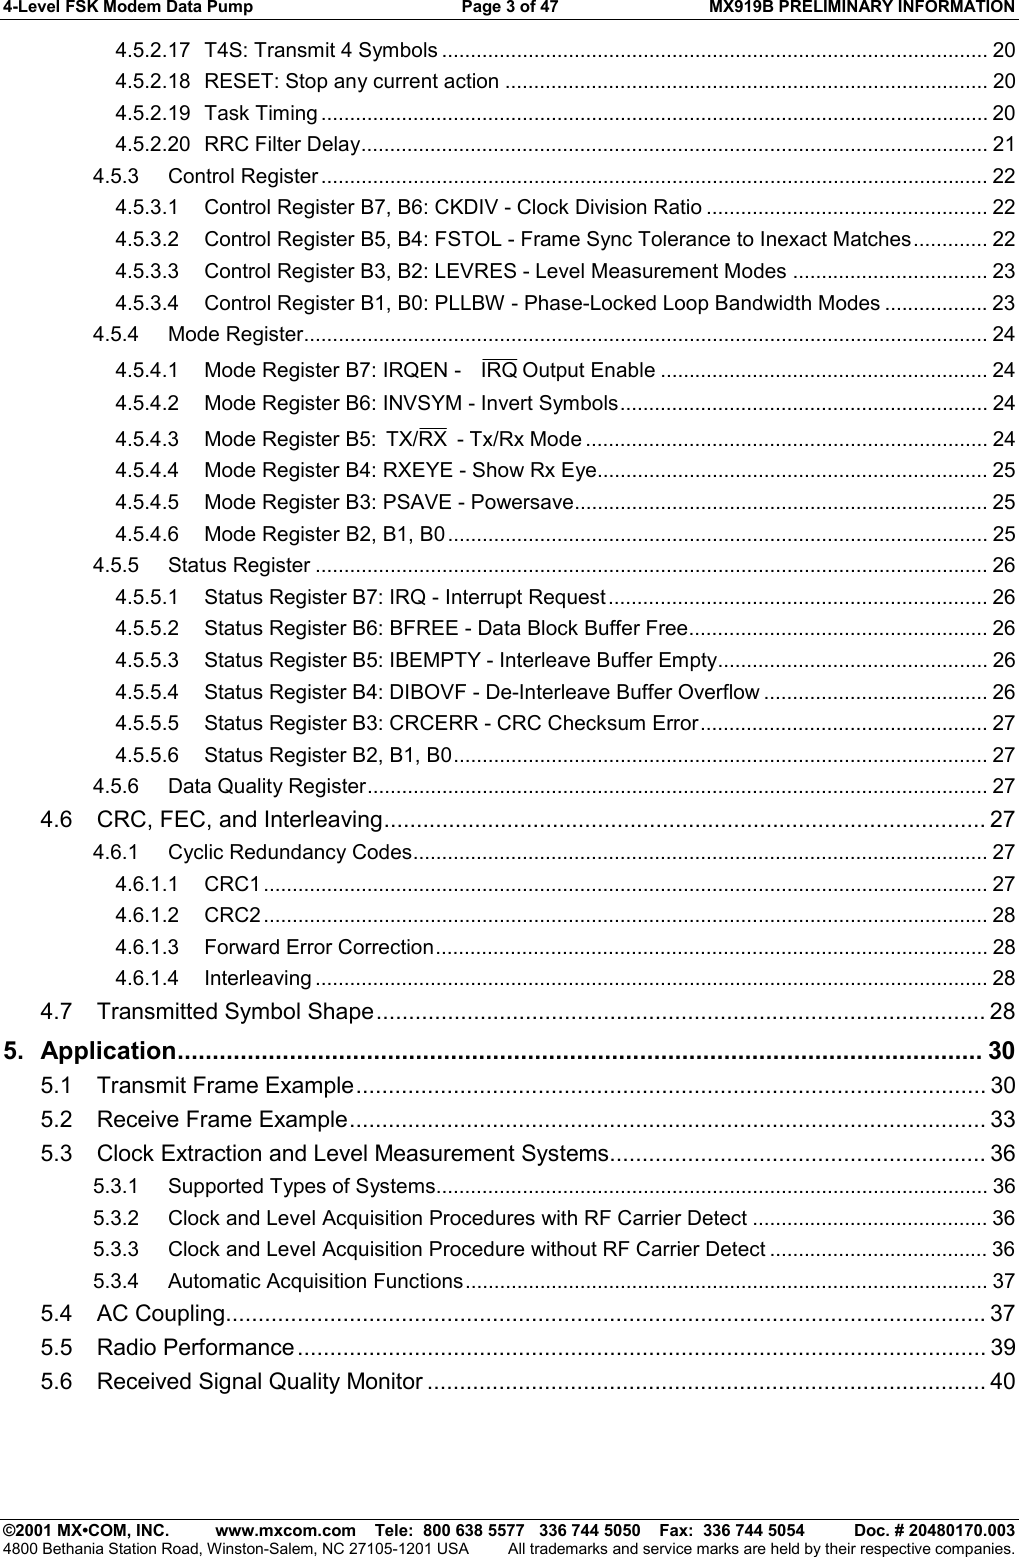 4-Level FSK Modem Data Pump  Page 3 of 47  MX919B PRELIMINARY INFORMATION   ©2001 MX•COM, INC.  www.mxcom.com    Tele:  800 638 5577   336 744 5050    Fax:  336 744 5054  Doc. # 20480170.003 4800 Bethania Station Road, Winston-Salem, NC 27105-1201 USA  All trademarks and service marks are held by their respective companies. 4.5.2.17 T4S: Transmit 4 Symbols ............................................................................................... 20 4.5.2.18 RESET: Stop any current action .................................................................................... 20 4.5.2.19 Task Timing .................................................................................................................... 20 4.5.2.20 RRC Filter Delay............................................................................................................. 21 4.5.3 Control Register .................................................................................................................... 22 4.5.3.1 Control Register B7, B6: CKDIV - Clock Division Ratio ................................................. 22 4.5.3.2 Control Register B5, B4: FSTOL - Frame Sync Tolerance to Inexact Matches............. 22 4.5.3.3 Control Register B3, B2: LEVRES - Level Measurement Modes .................................. 23 4.5.3.4 Control Register B1, B0: PLLBW - Phase-Locked Loop Bandwidth Modes .................. 23 4.5.4 Mode Register....................................................................................................................... 24 4.5.4.1 Mode Register B7: IRQEN -   IRQ Output Enable ......................................................... 24 4.5.4.2 Mode Register B6: INVSYM - Invert Symbols................................................................ 24 4.5.4.3 Mode Register B5:  RXTX/  - Tx/Rx Mode ...................................................................... 24 4.5.4.4 Mode Register B4: RXEYE - Show Rx Eye.................................................................... 25 4.5.4.5 Mode Register B3: PSAVE - Powersave........................................................................ 25 4.5.4.6 Mode Register B2, B1, B0.............................................................................................. 25 4.5.5 Status Register ..................................................................................................................... 26 4.5.5.1 Status Register B7: IRQ - Interrupt Request .................................................................. 26 4.5.5.2 Status Register B6: BFREE - Data Block Buffer Free.................................................... 26 4.5.5.3 Status Register B5: IBEMPTY - Interleave Buffer Empty............................................... 26 4.5.5.4 Status Register B4: DIBOVF - De-Interleave Buffer Overflow ....................................... 26 4.5.5.5 Status Register B3: CRCERR - CRC Checksum Error.................................................. 27 4.5.5.6 Status Register B2, B1, B0............................................................................................. 27 4.5.6 Data Quality Register............................................................................................................ 27 4.6 CRC, FEC, and Interleaving............................................................................................. 27 4.6.1 Cyclic Redundancy Codes.................................................................................................... 27 4.6.1.1 CRC1 .............................................................................................................................. 27 4.6.1.2 CRC2 .............................................................................................................................. 28 4.6.1.3 Forward Error Correction................................................................................................ 28 4.6.1.4 Interleaving ..................................................................................................................... 28 4.7 Transmitted Symbol Shape.............................................................................................. 28 5. Application................................................................................................................... 30 5.1 Transmit Frame Example................................................................................................. 30 5.2 Receive Frame Example.................................................................................................. 33 5.3 Clock Extraction and Level Measurement Systems.......................................................... 36 5.3.1 Supported Types of Systems................................................................................................ 36 5.3.2 Clock and Level Acquisition Procedures with RF Carrier Detect ......................................... 36 5.3.3 Clock and Level Acquisition Procedure without RF Carrier Detect ...................................... 36 5.3.4 Automatic Acquisition Functions........................................................................................... 37 5.4 AC Coupling.....................................................................................................................37 5.5 Radio Performance.......................................................................................................... 39 5.6 Received Signal Quality Monitor ...................................................................................... 40 